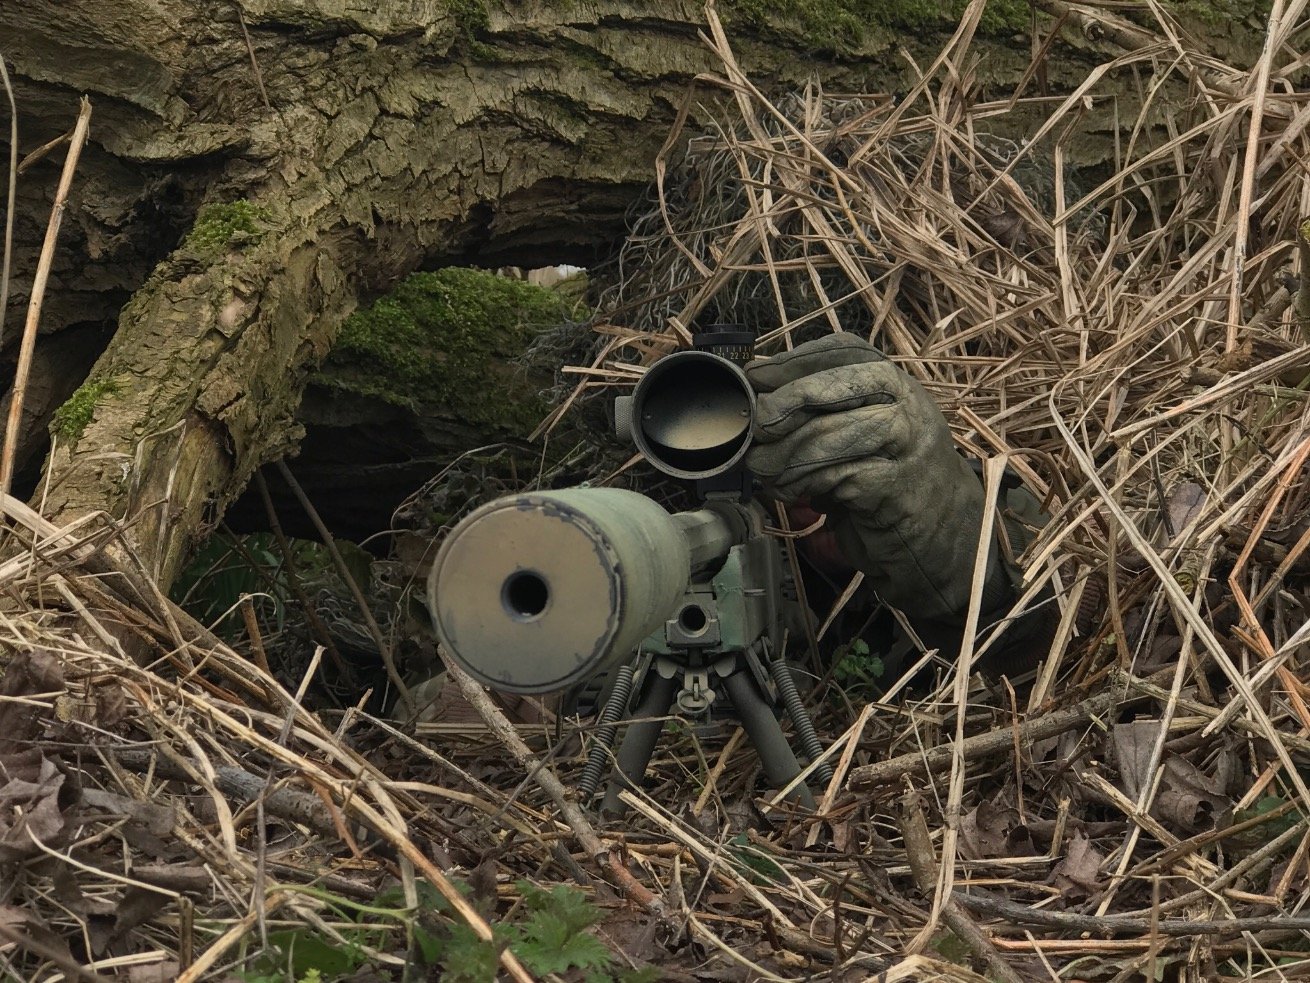 We offer a battlefield-developed sniper products. Designed and manufactured in the UK, our products are endorsed and approved by the MoD.